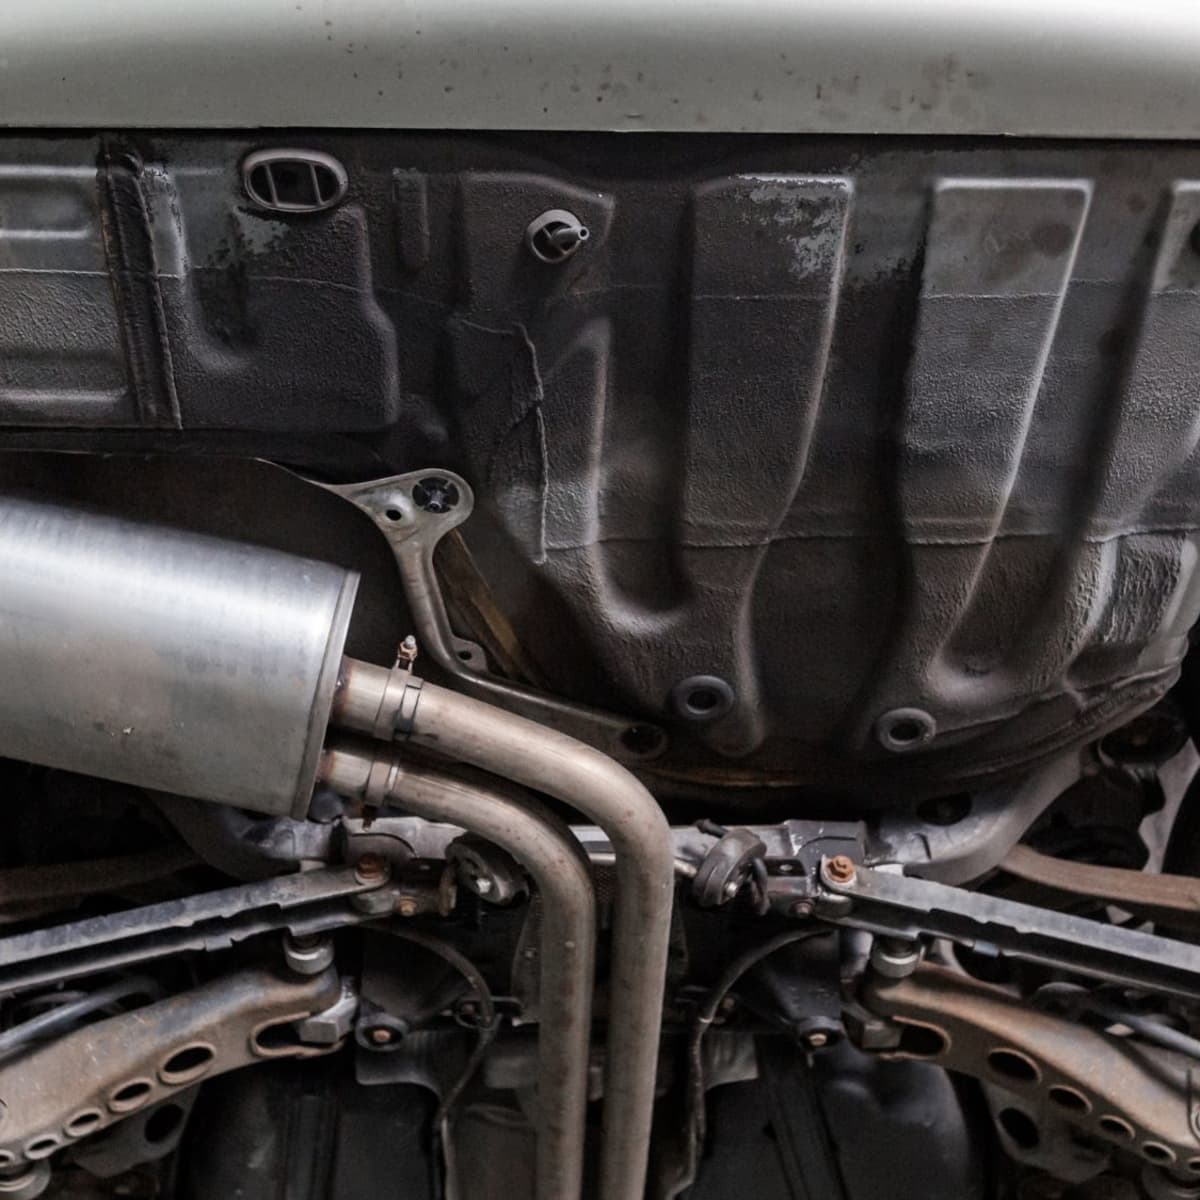 Exhaust Leaks: What They Are, How to Find and Fix Them